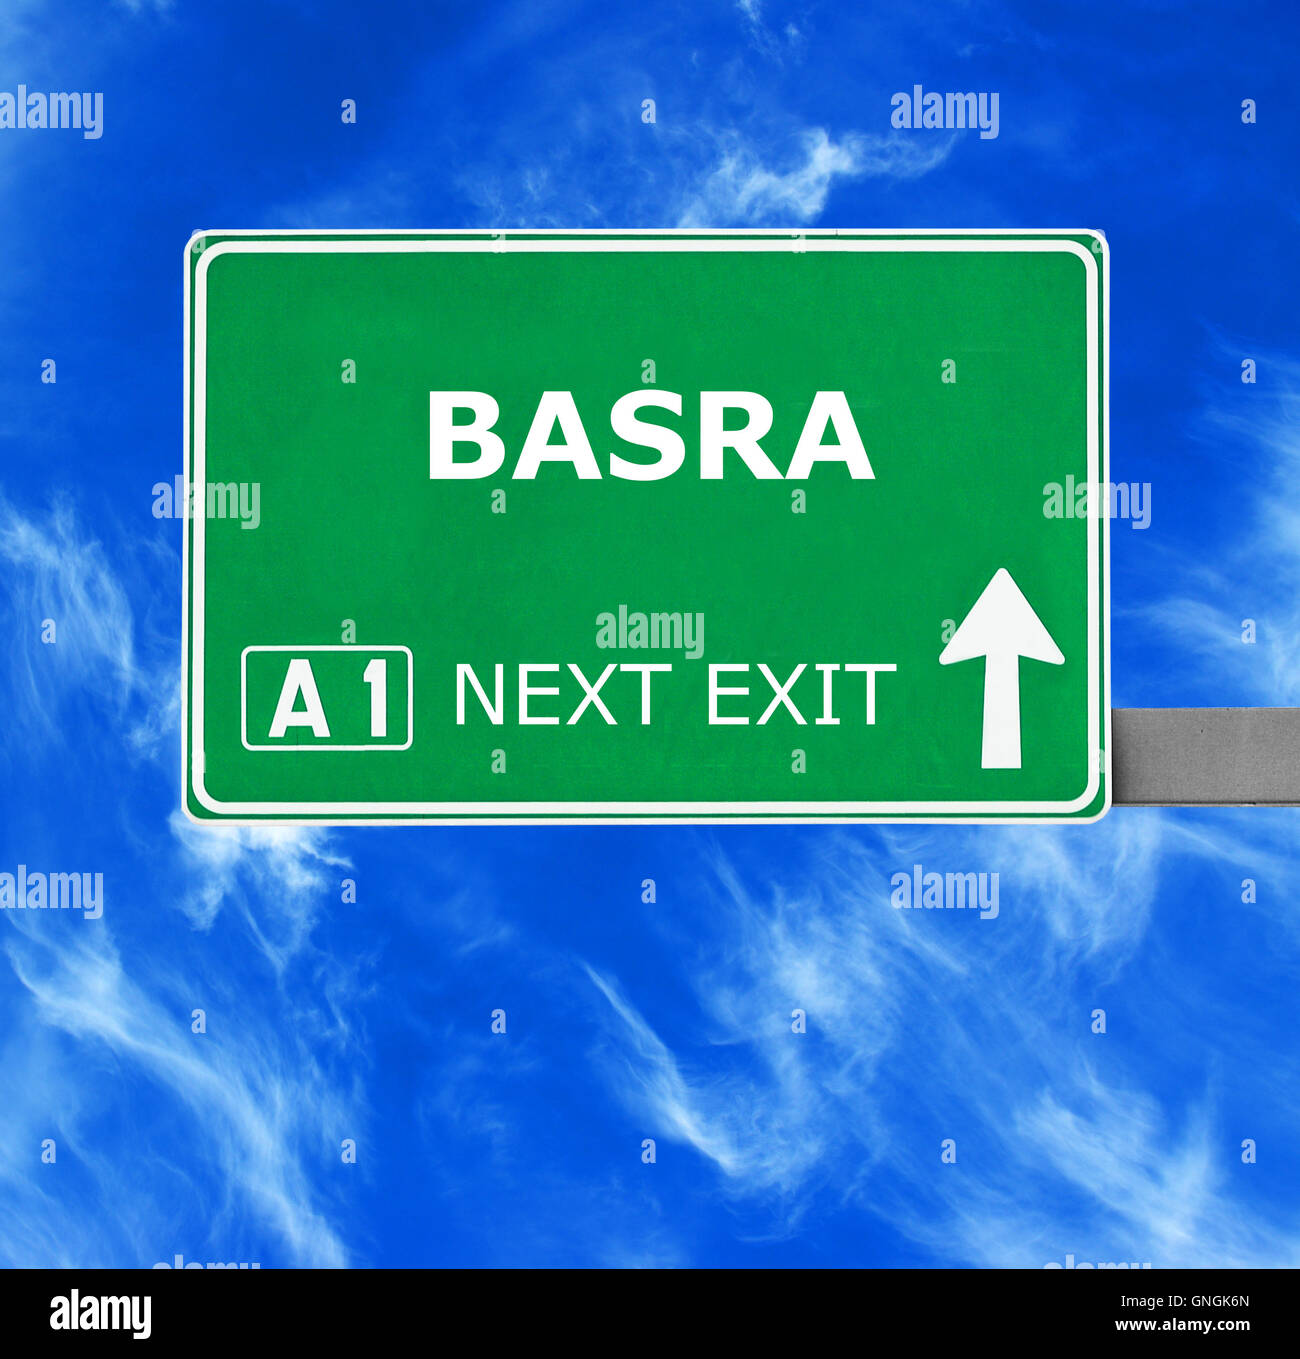 BASRA road sign against clear blue sky Stock Photo